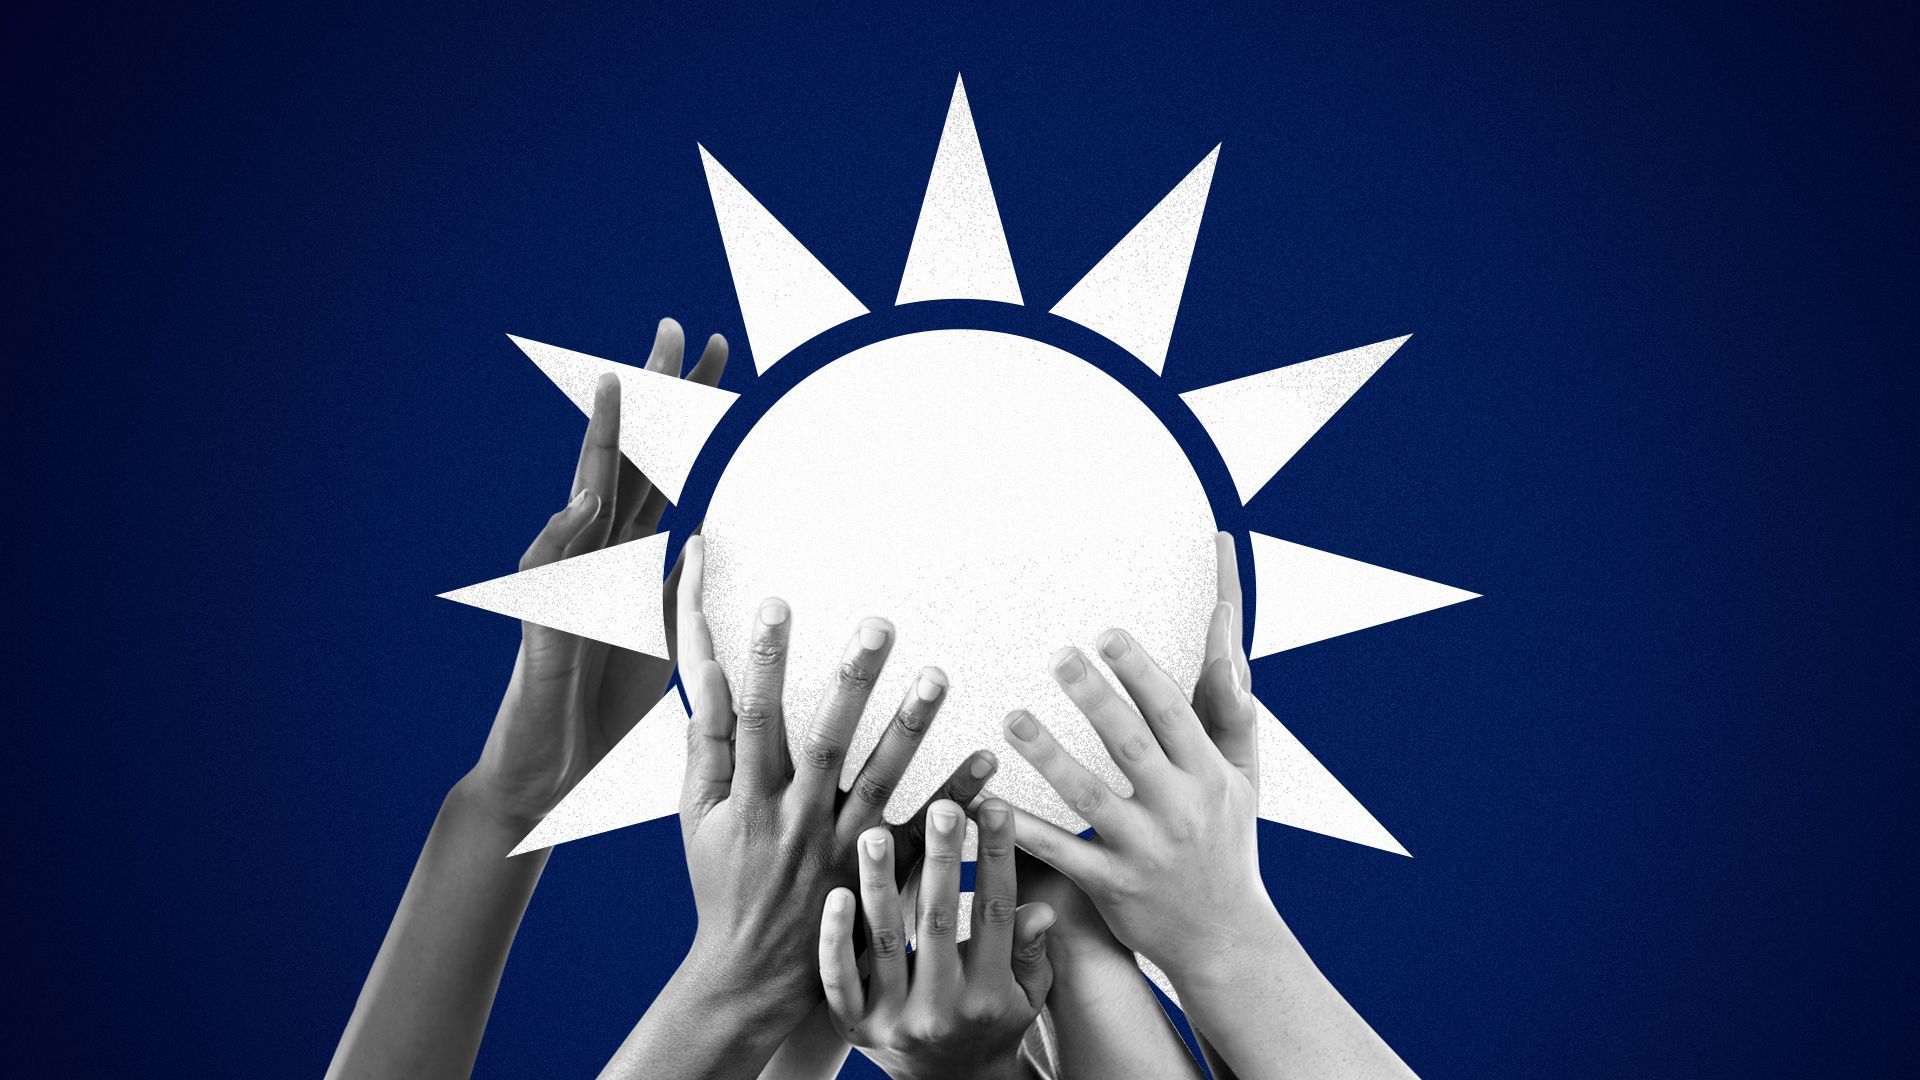 Illustration of hands holding up the Taiwanese sun flag icon, the Blue Sky with a White Sun.